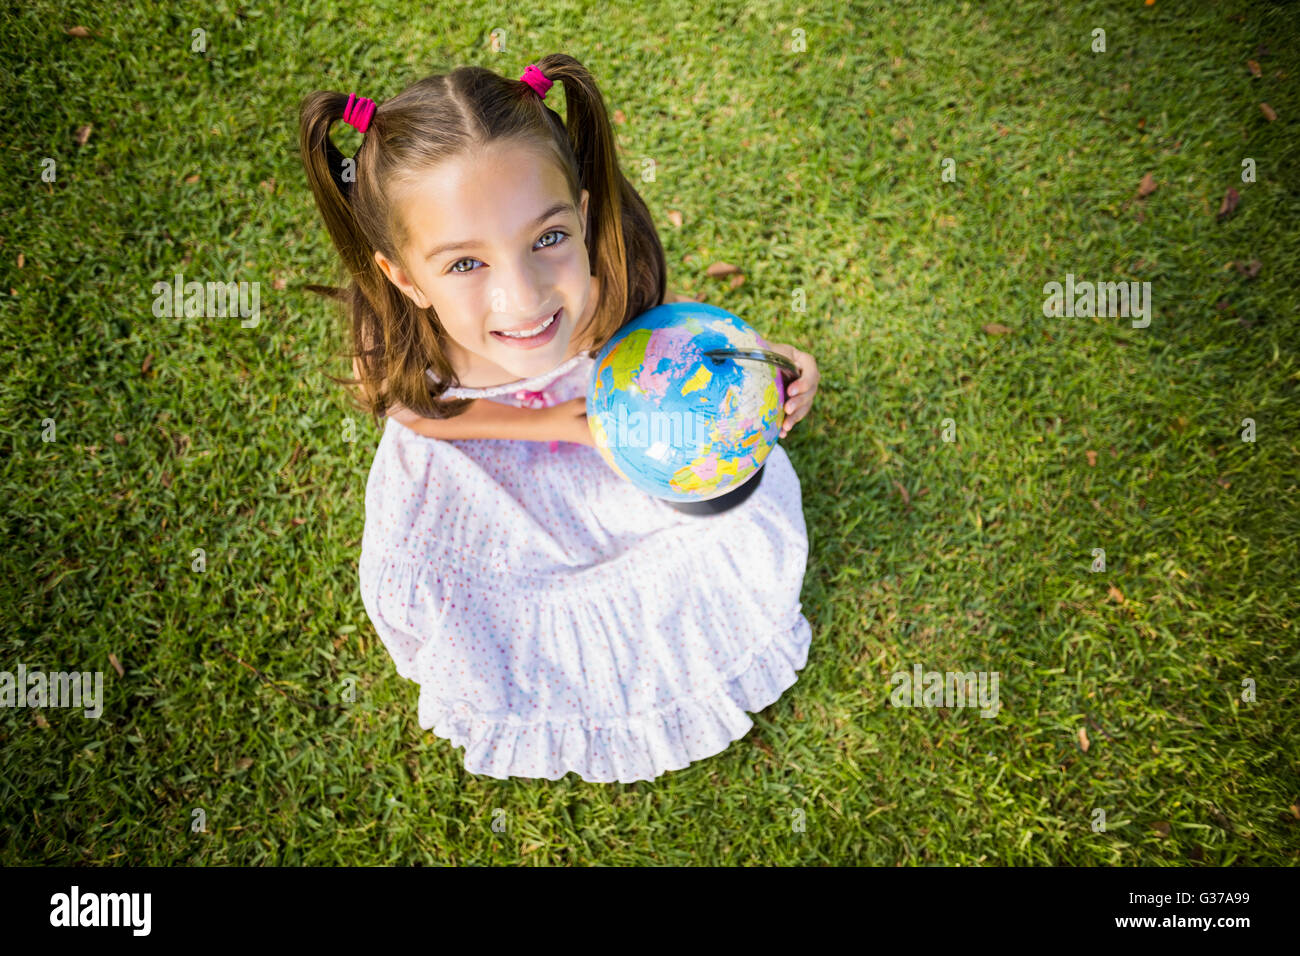 Young Girl holding a globe Banque D'Images